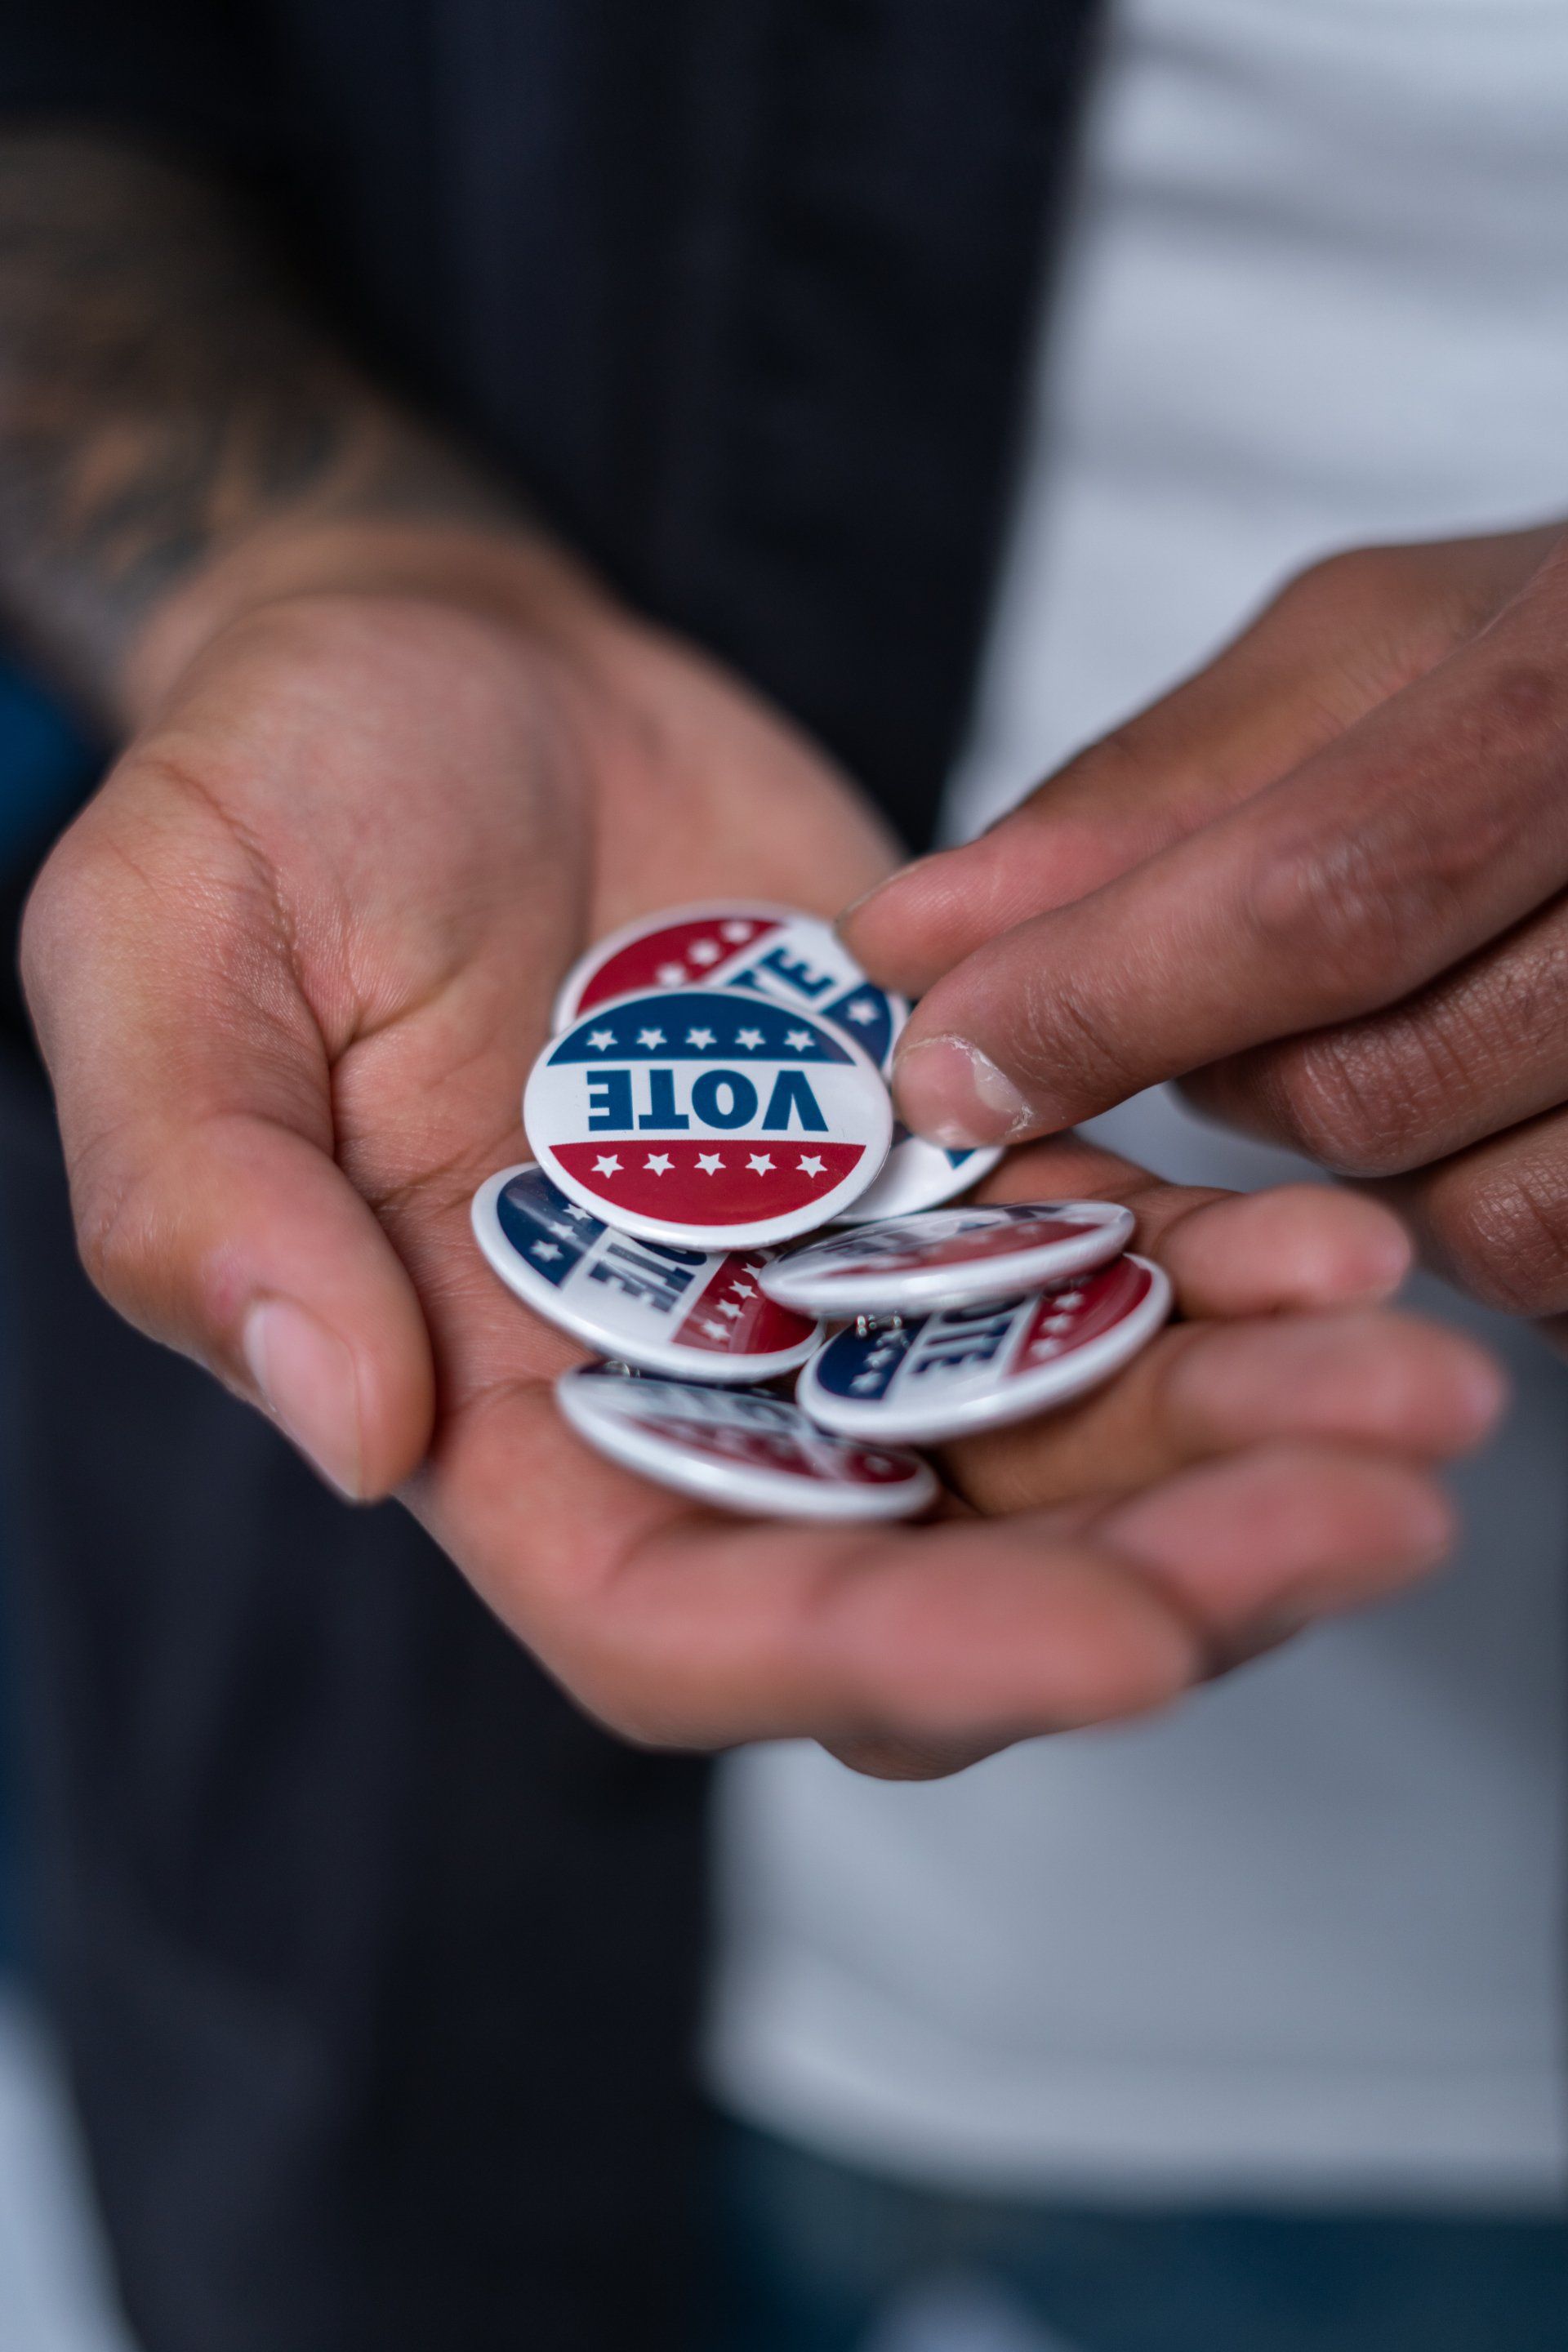 A person is holding a bunch of vote buttons in their hands